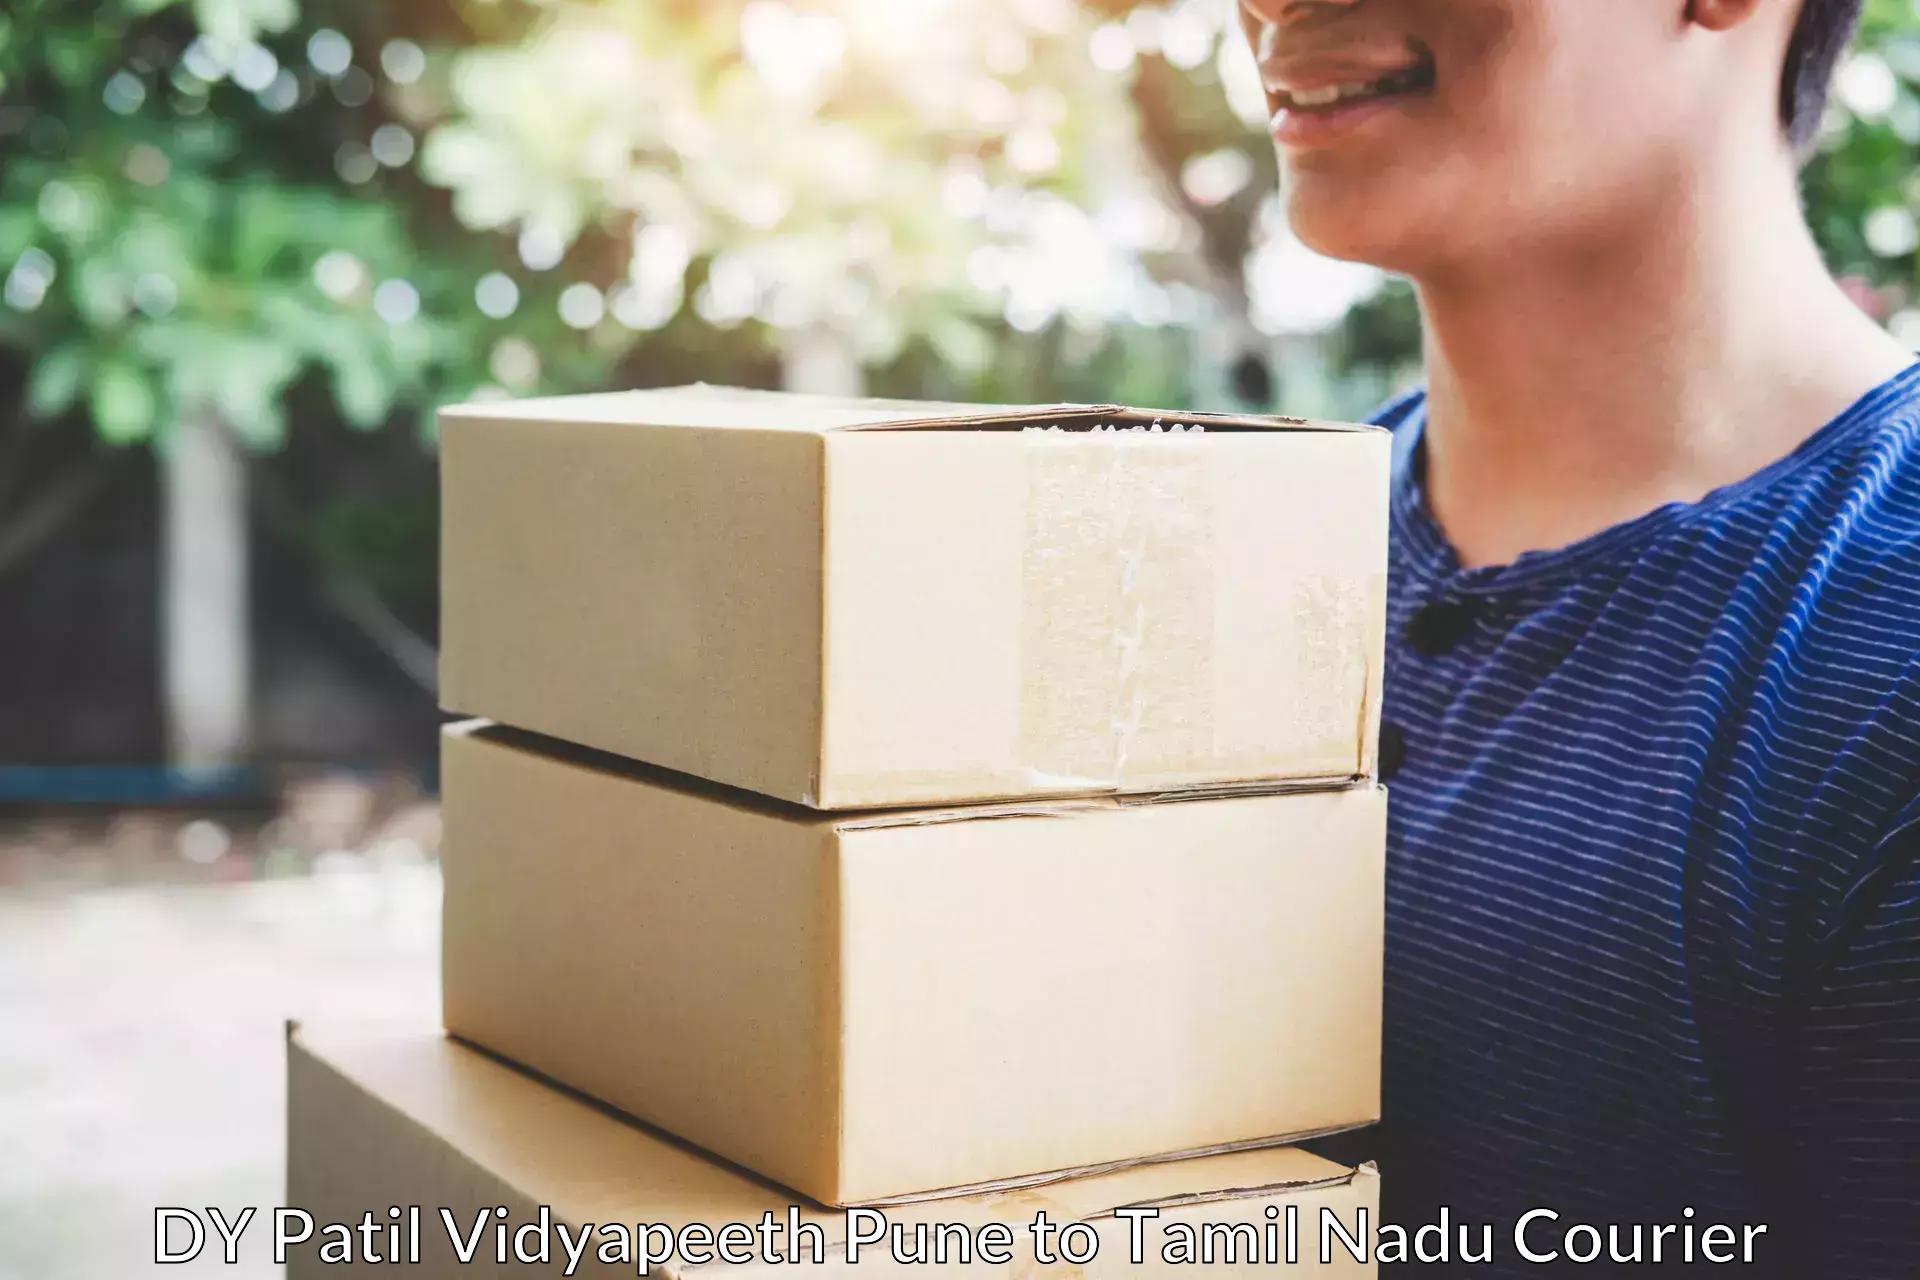 Budget-friendly moving services DY Patil Vidyapeeth Pune to Tamil Nadu